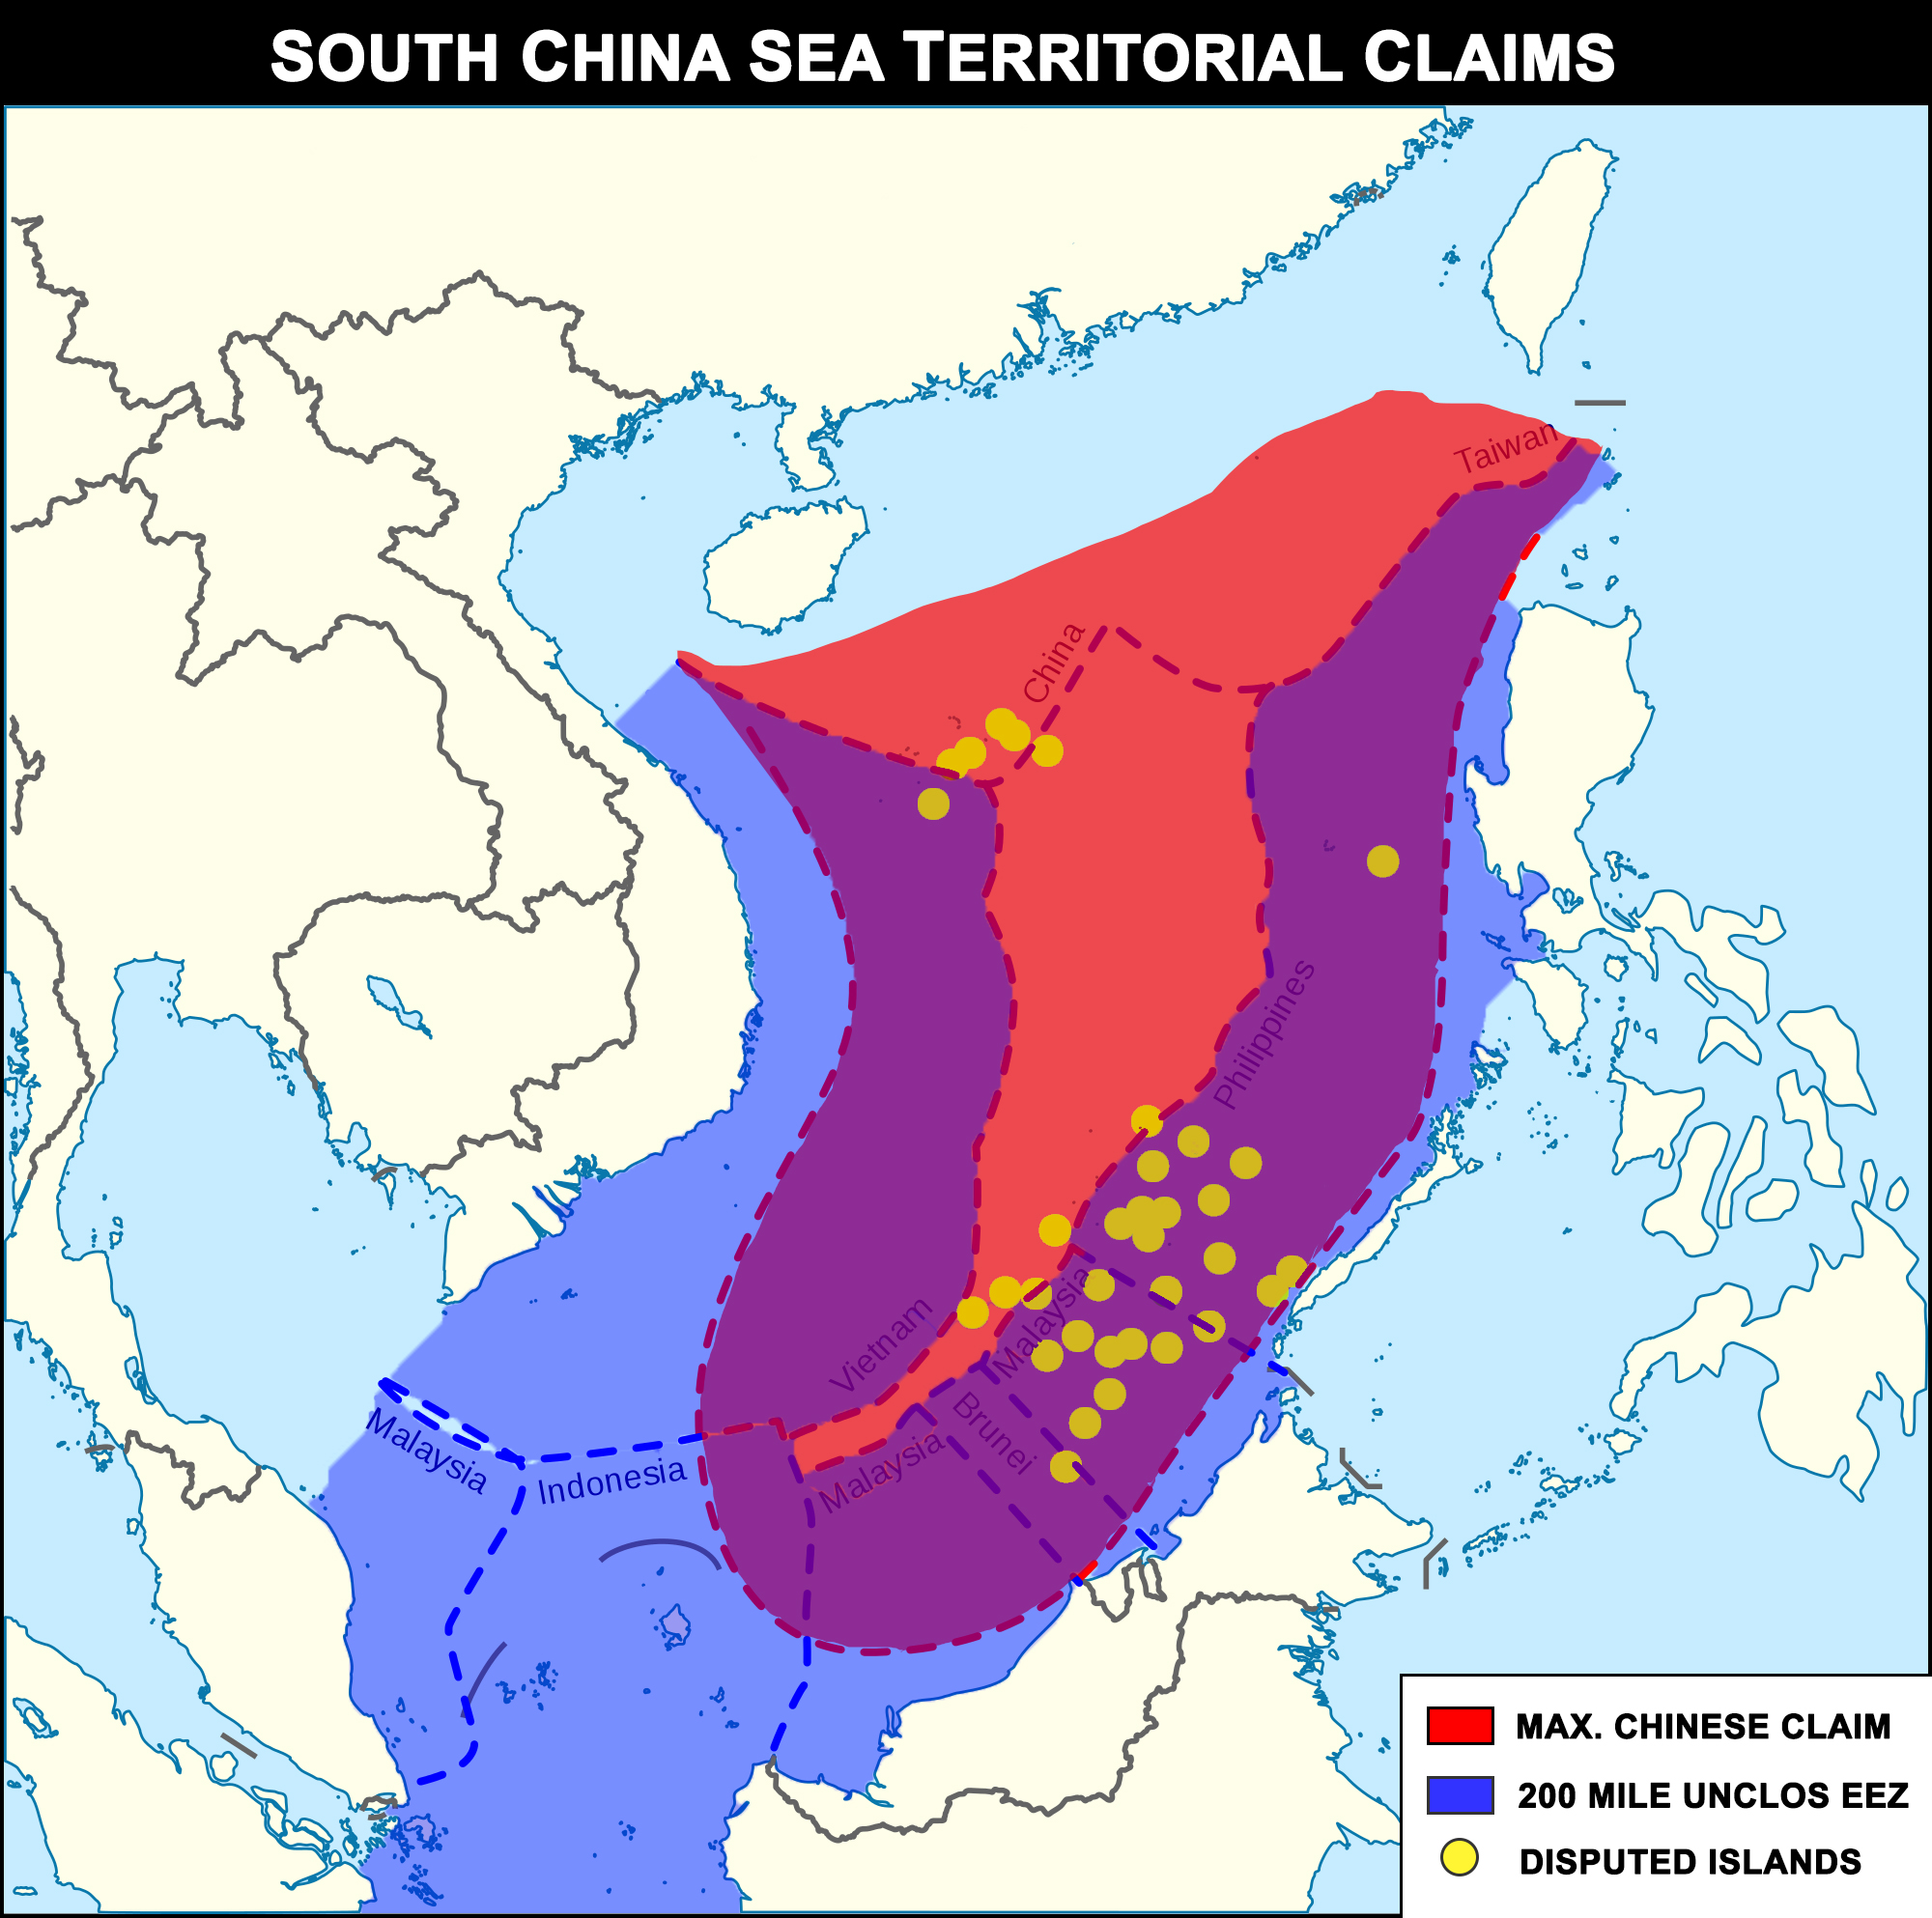 CHINESE TERRITORIAL CLAIMS SOUTH CHINA SEA